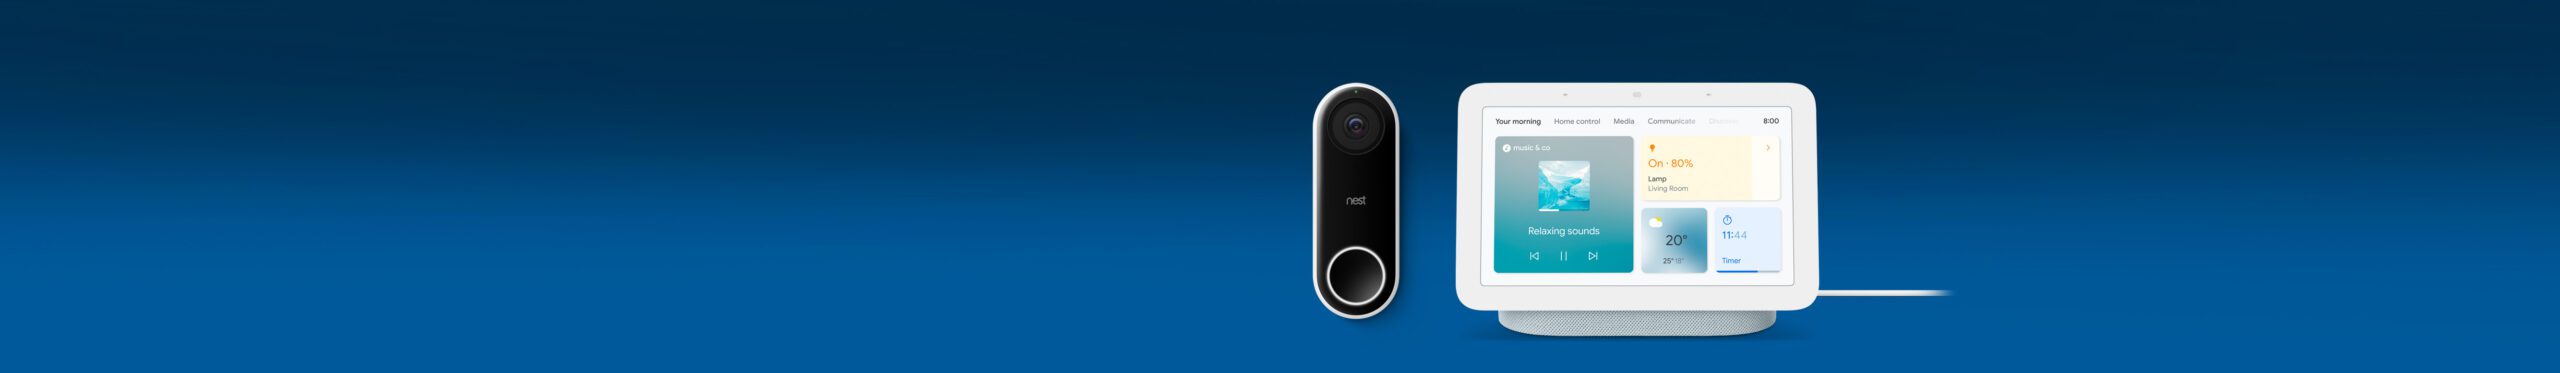 Smart home offer with Nest doorbell and nest hub